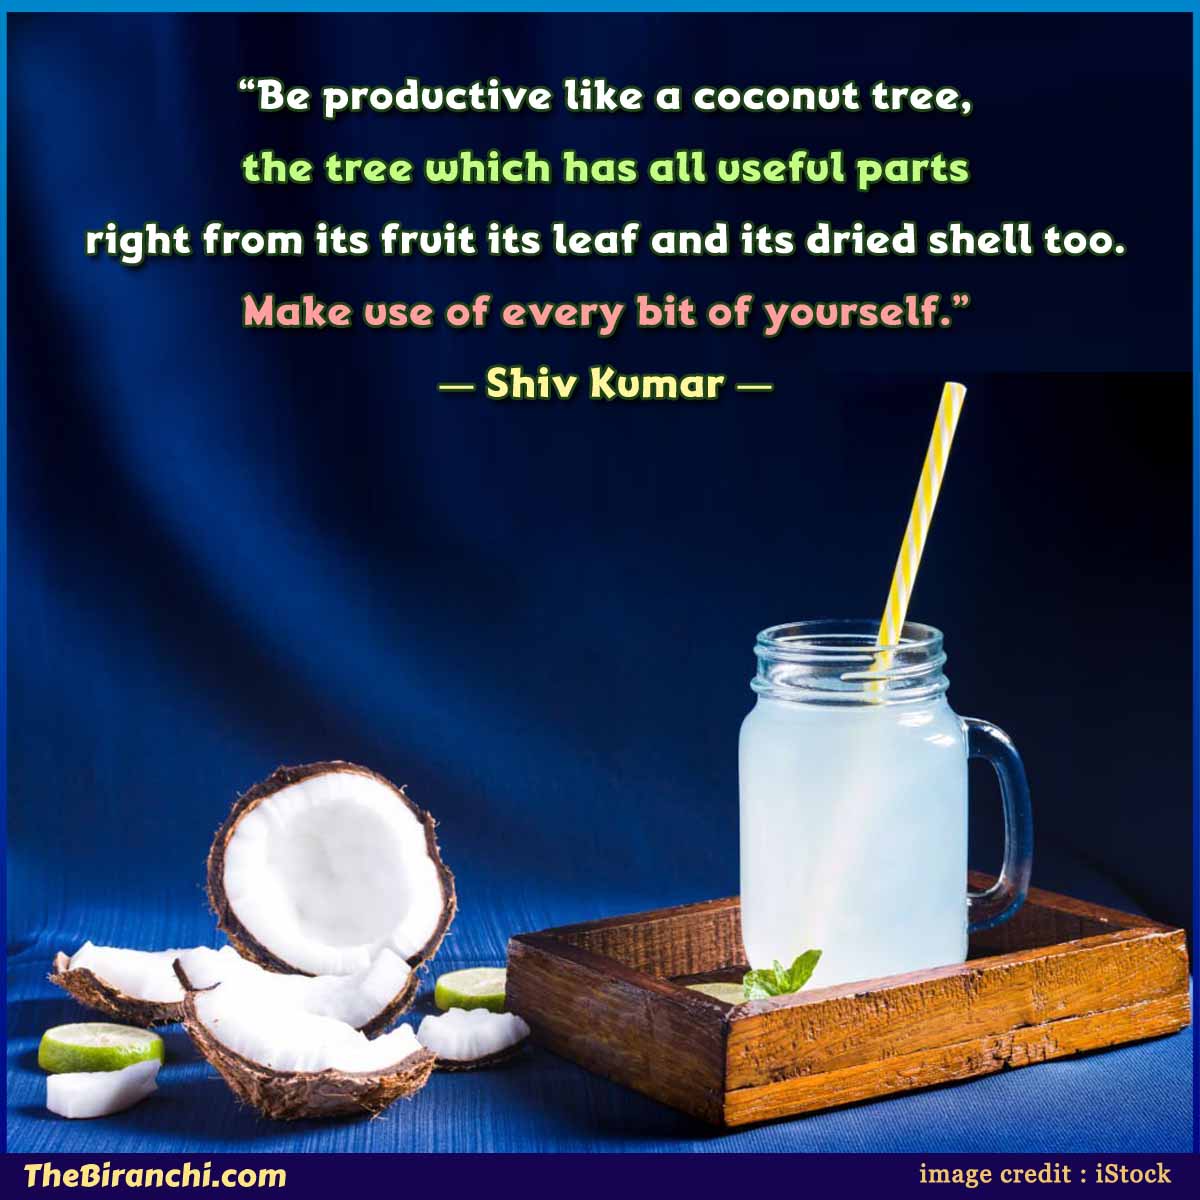 be-productive-like-a-coconut-tree-shiv-kumar-coconut-day-quotes-wishes-greetings-messages